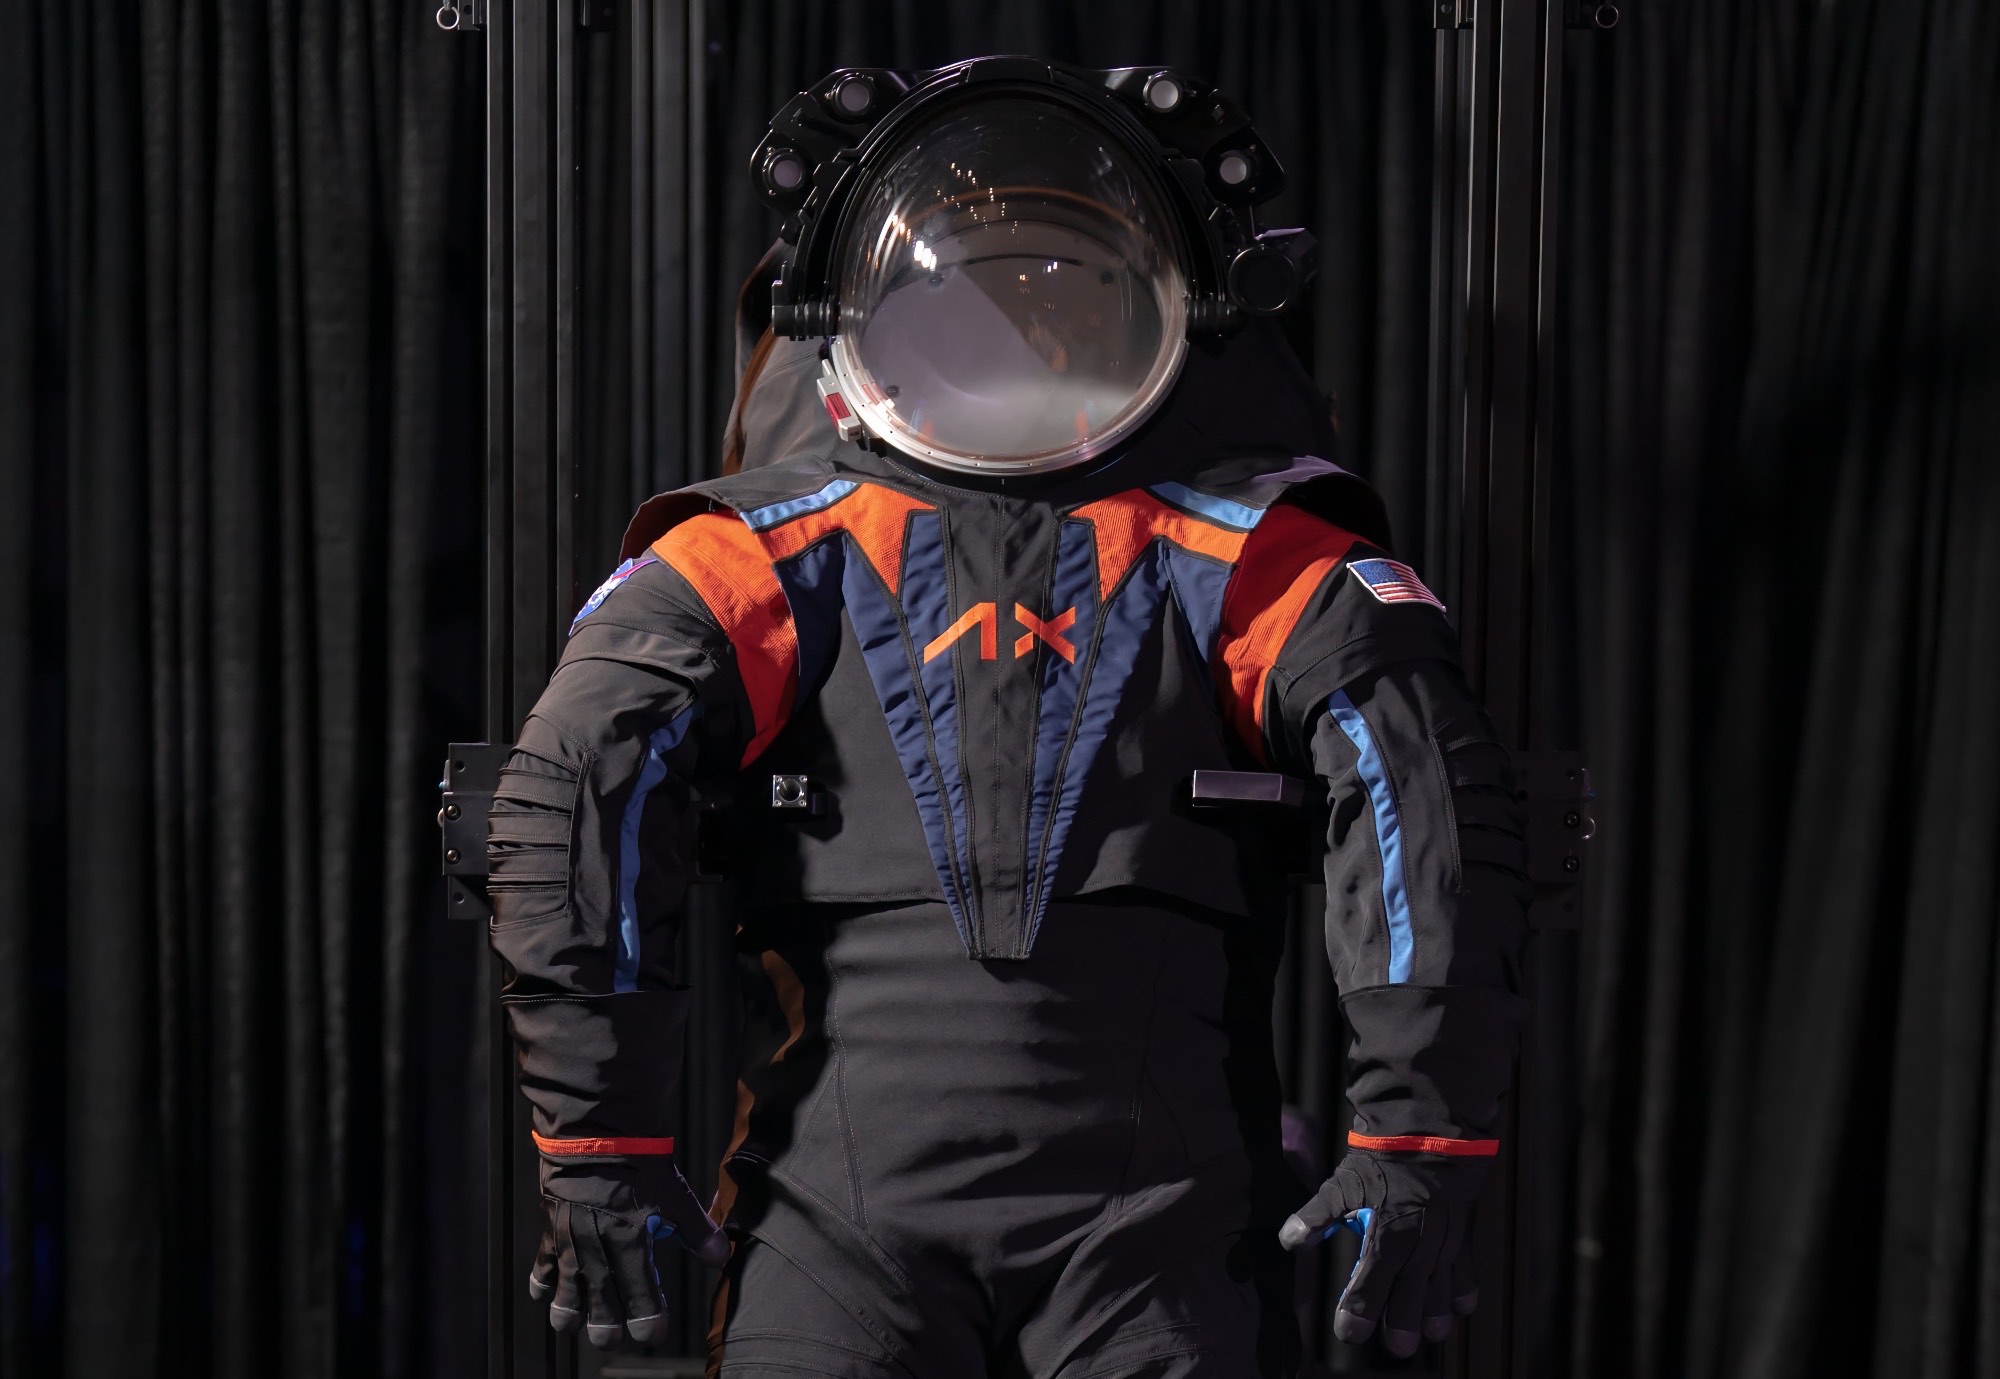 Here is the new spacesuit that will be used on the moon.  In Artemis III – which is scheduled for release in early 2025.